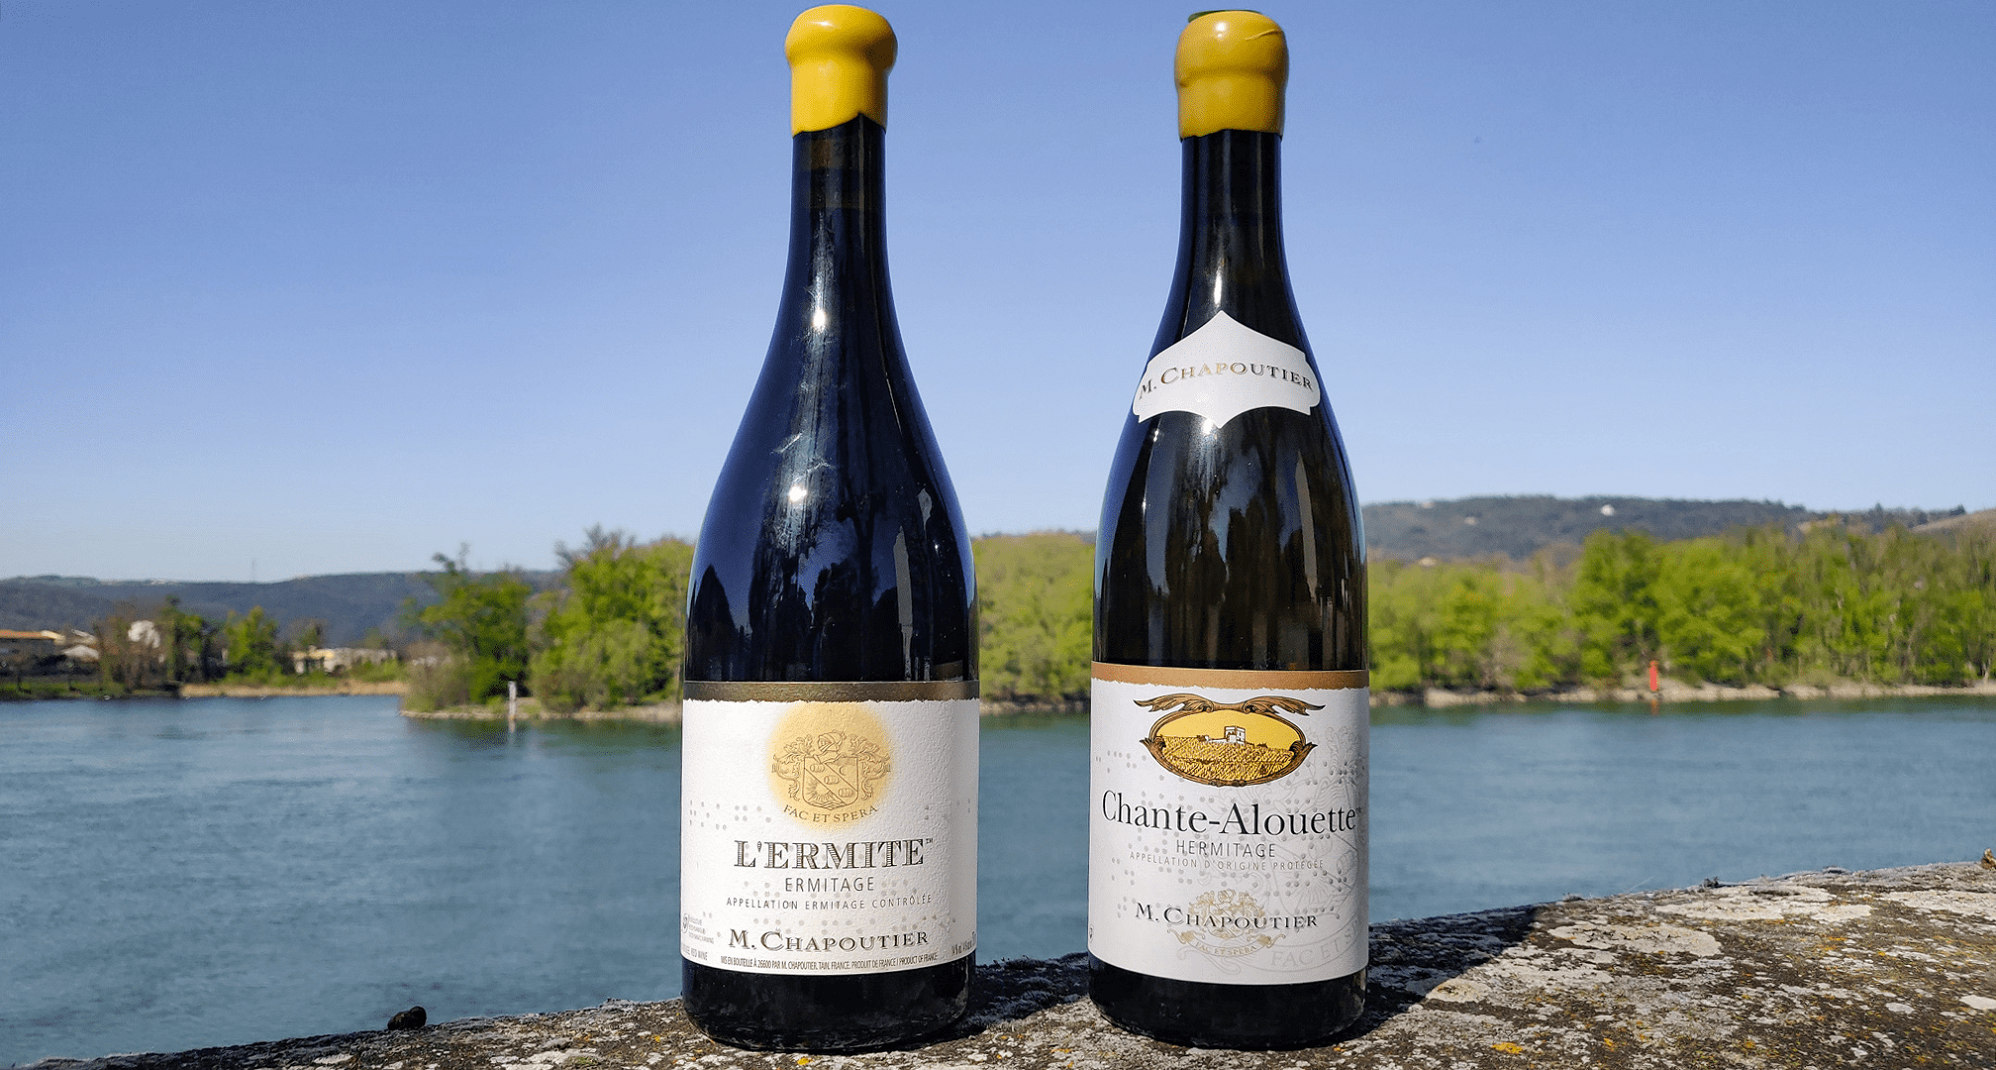  Everything you need to know about Ermitage and Hermitage appellation